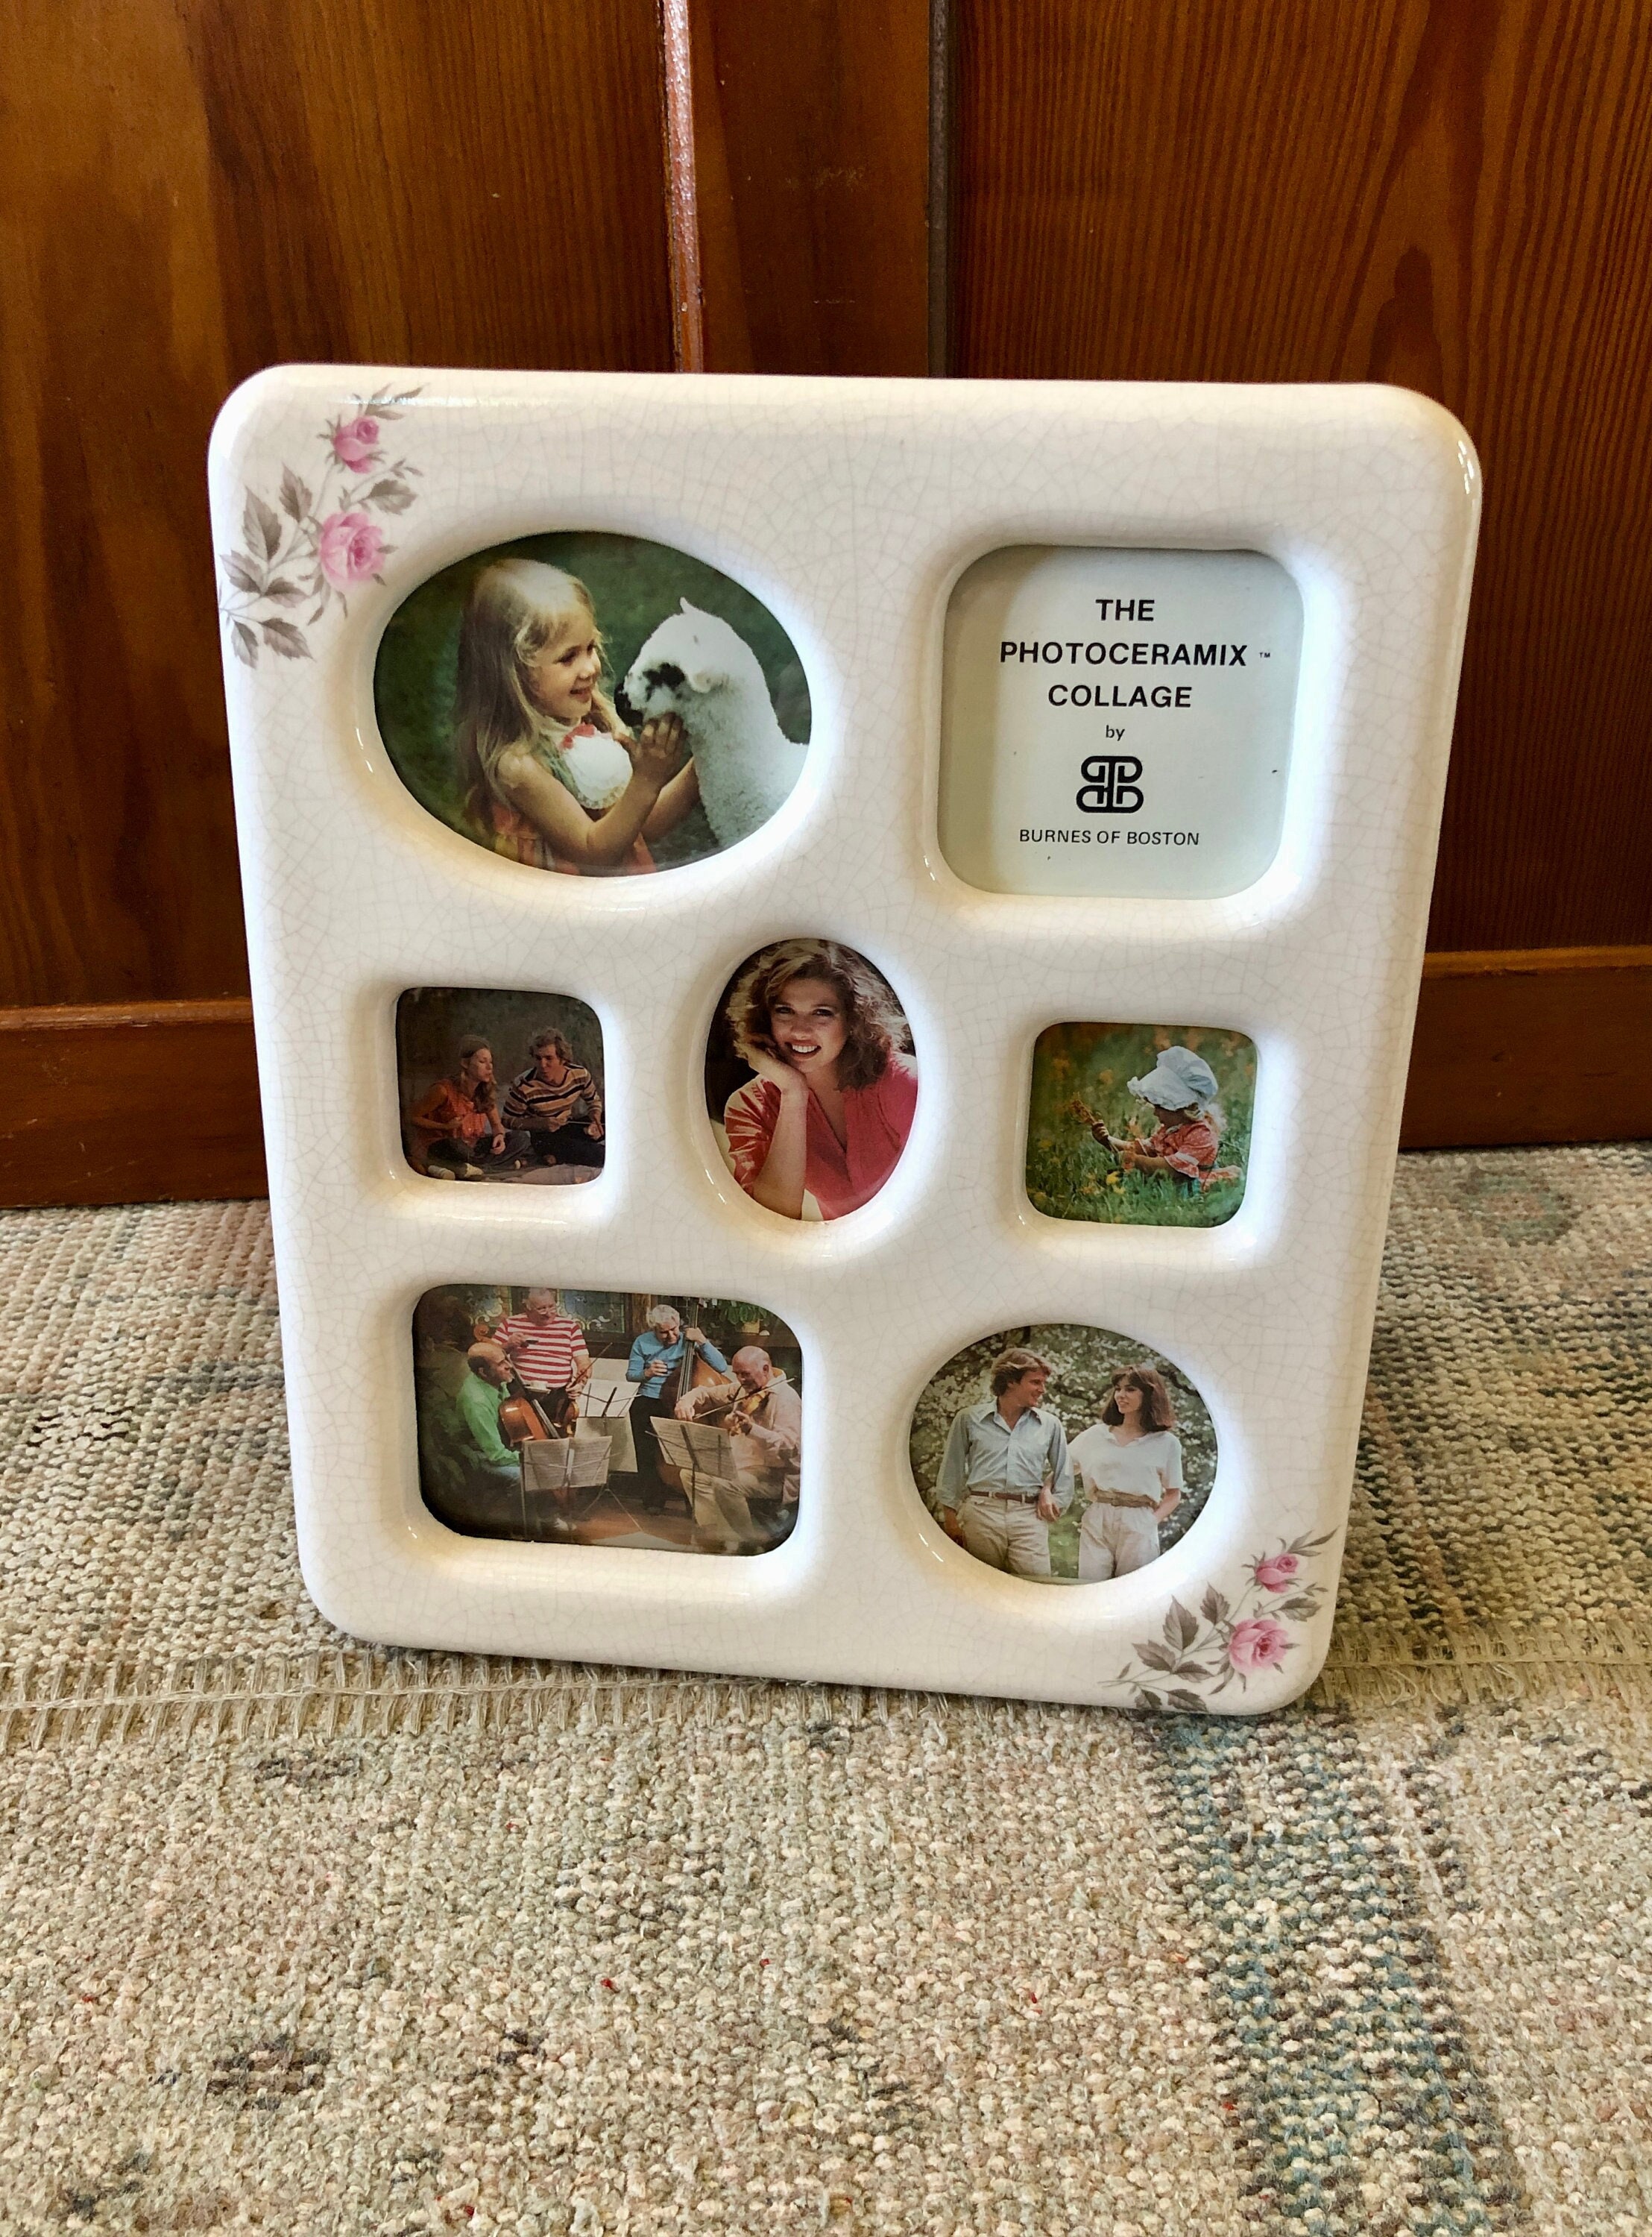 Multi Aperture Photo Frame. Holds One 8x8 Photo and Twelve 4x4 Photos.  50x50cm. Wooden Collage Photo Frame. Handmade by Arthome. 